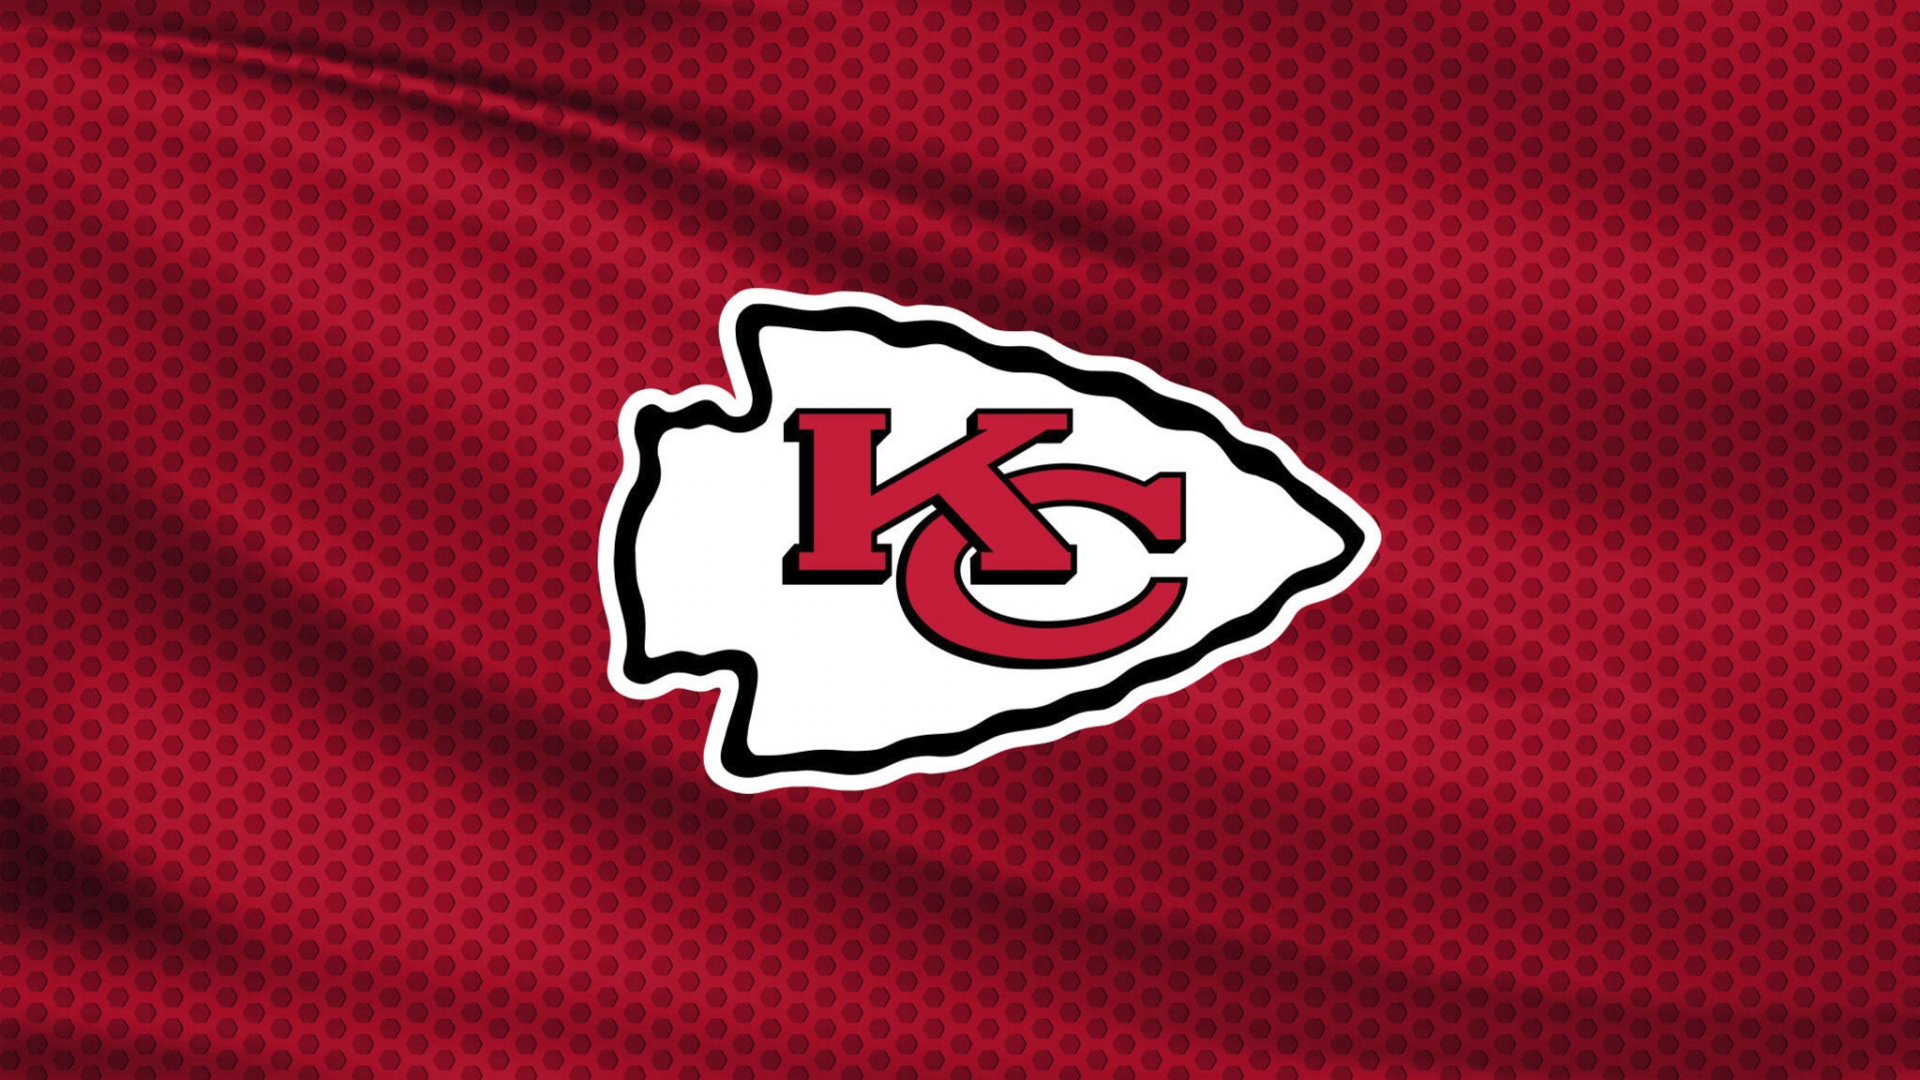 Kansas City Chiefs 2021 Schedule: Date, Time, Key Games, Team Predictions, How to Watch